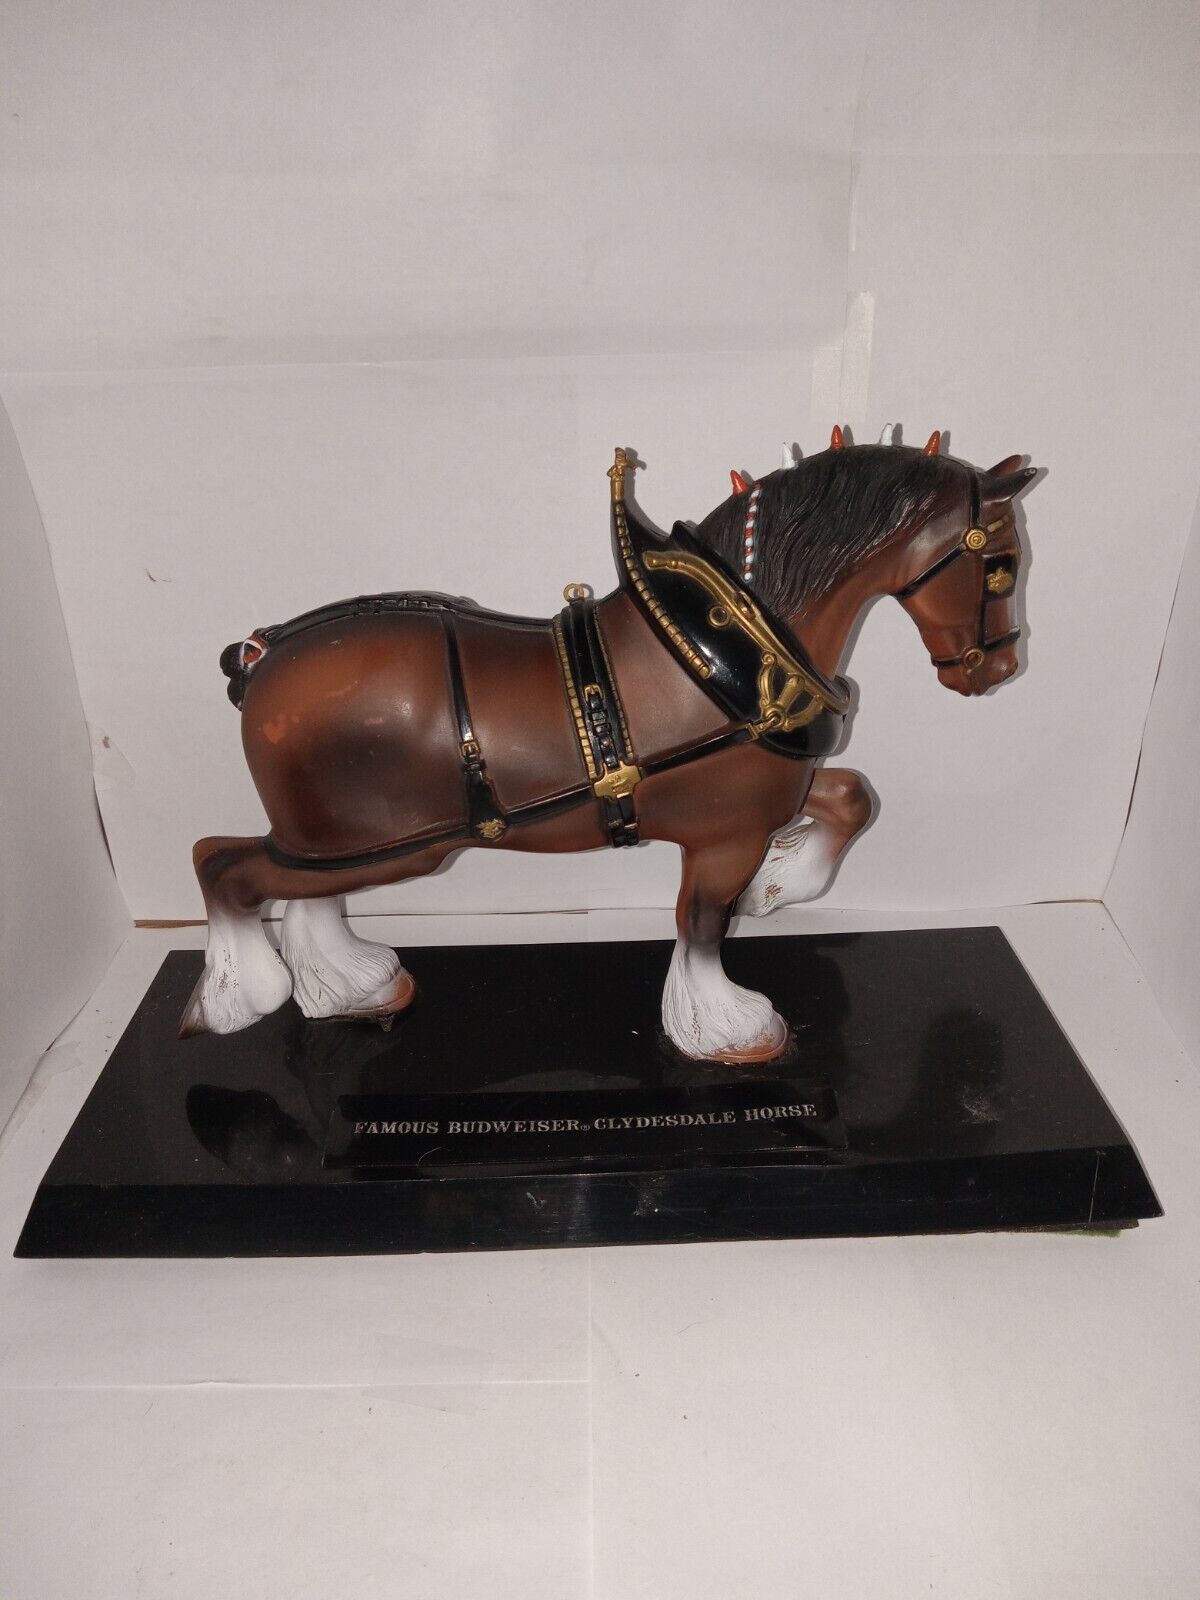 Vintage Famous Budweiser Clydesdale Horse Figurine on Base